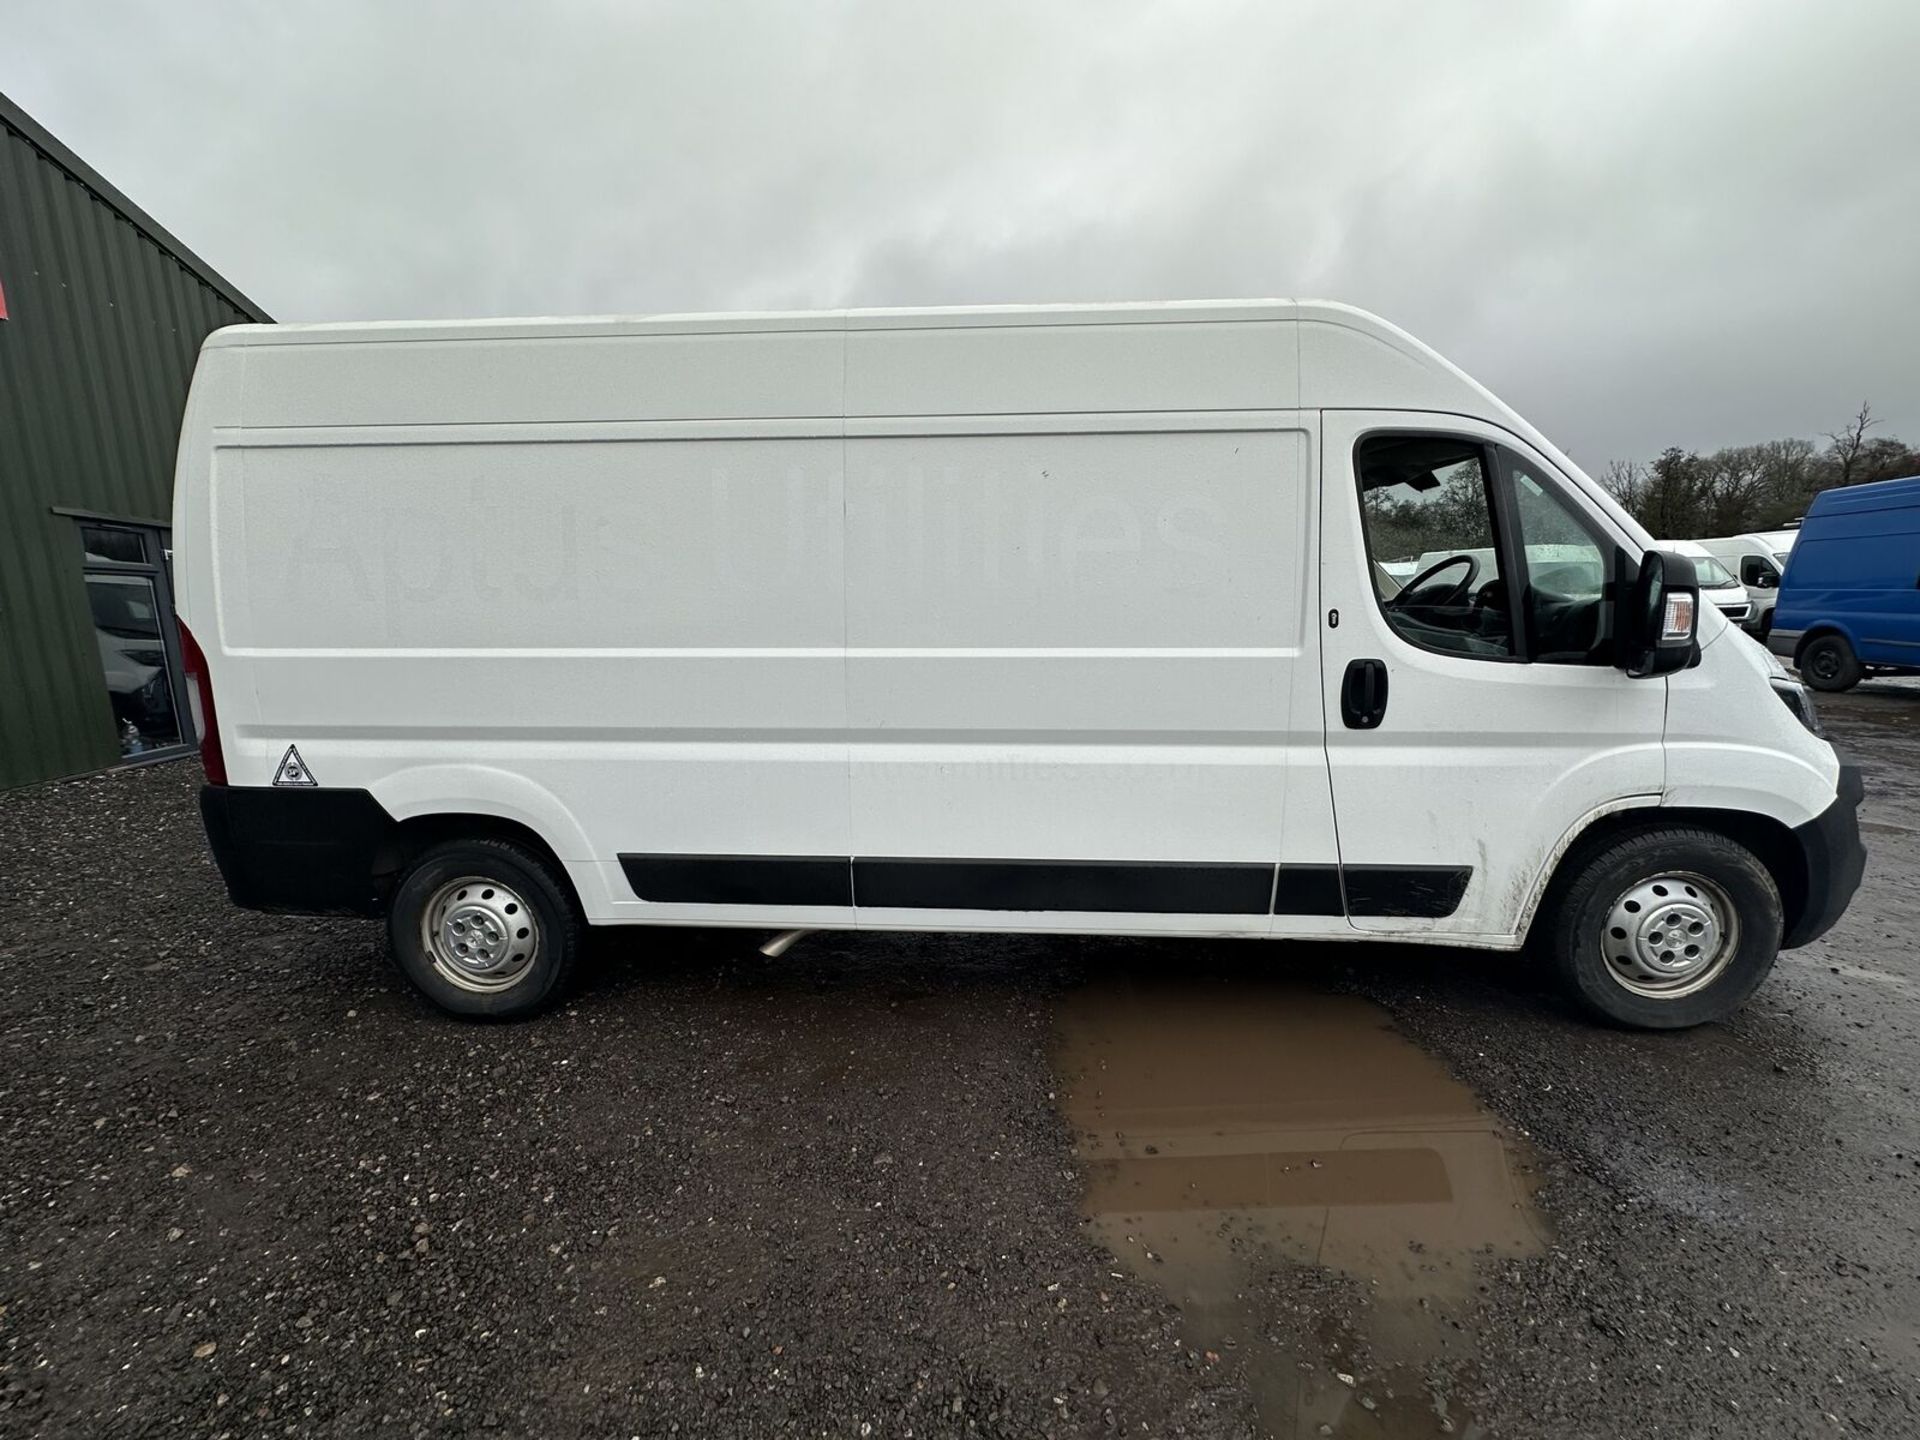 WHITE WORKHORSE: 2019 PANEL VAN, READY FOR DUTY - Image 2 of 18